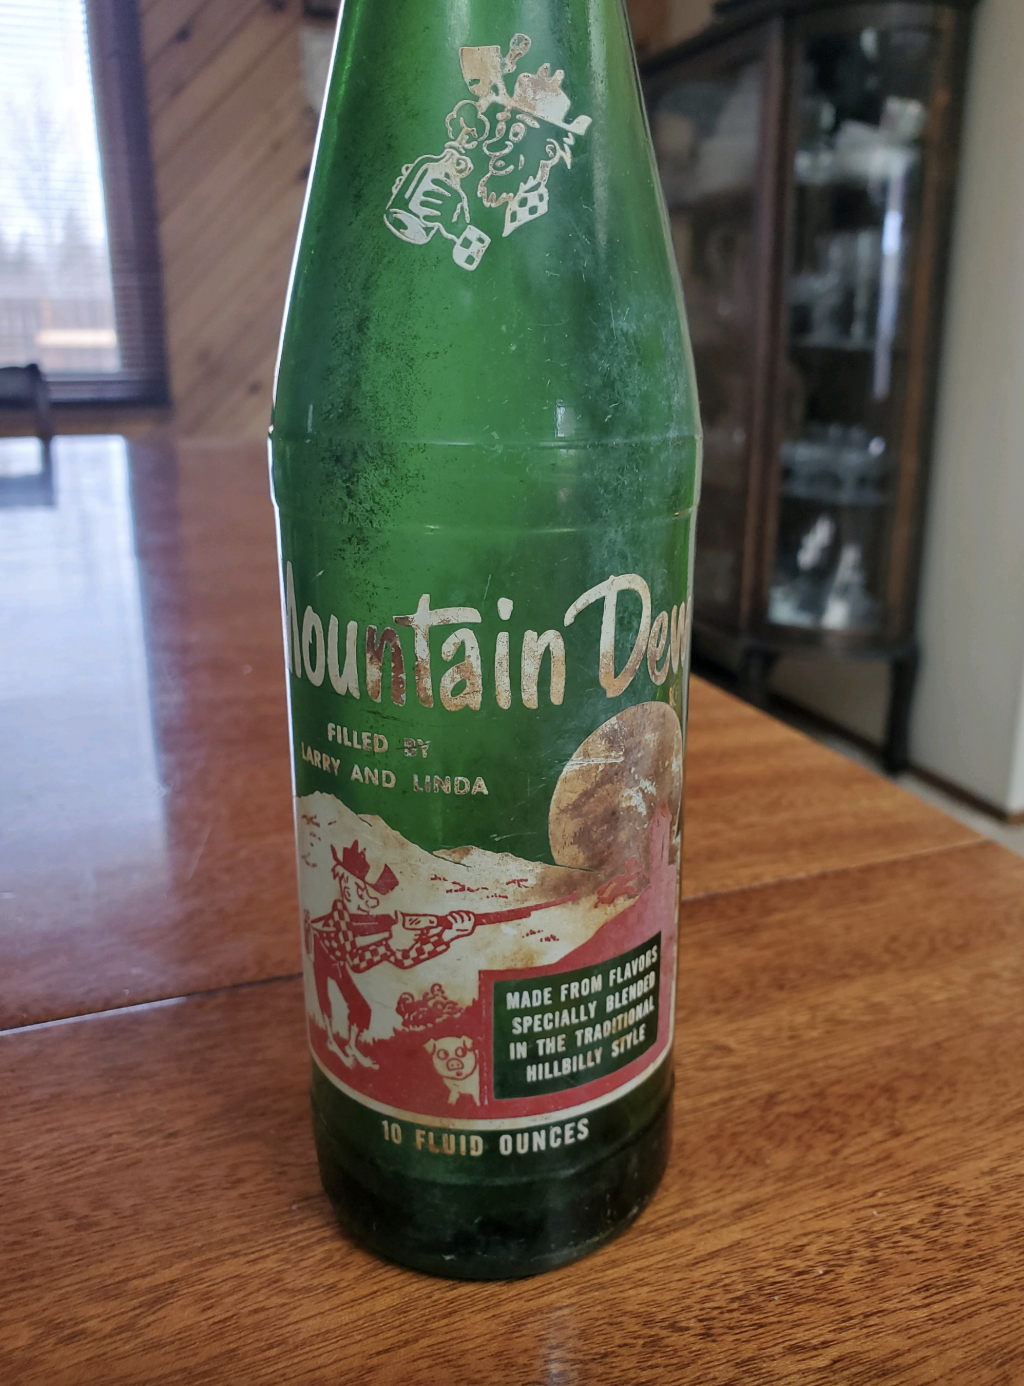 Vintage Mountain Dew bottle with old logo and illustrations, text about the brand origins